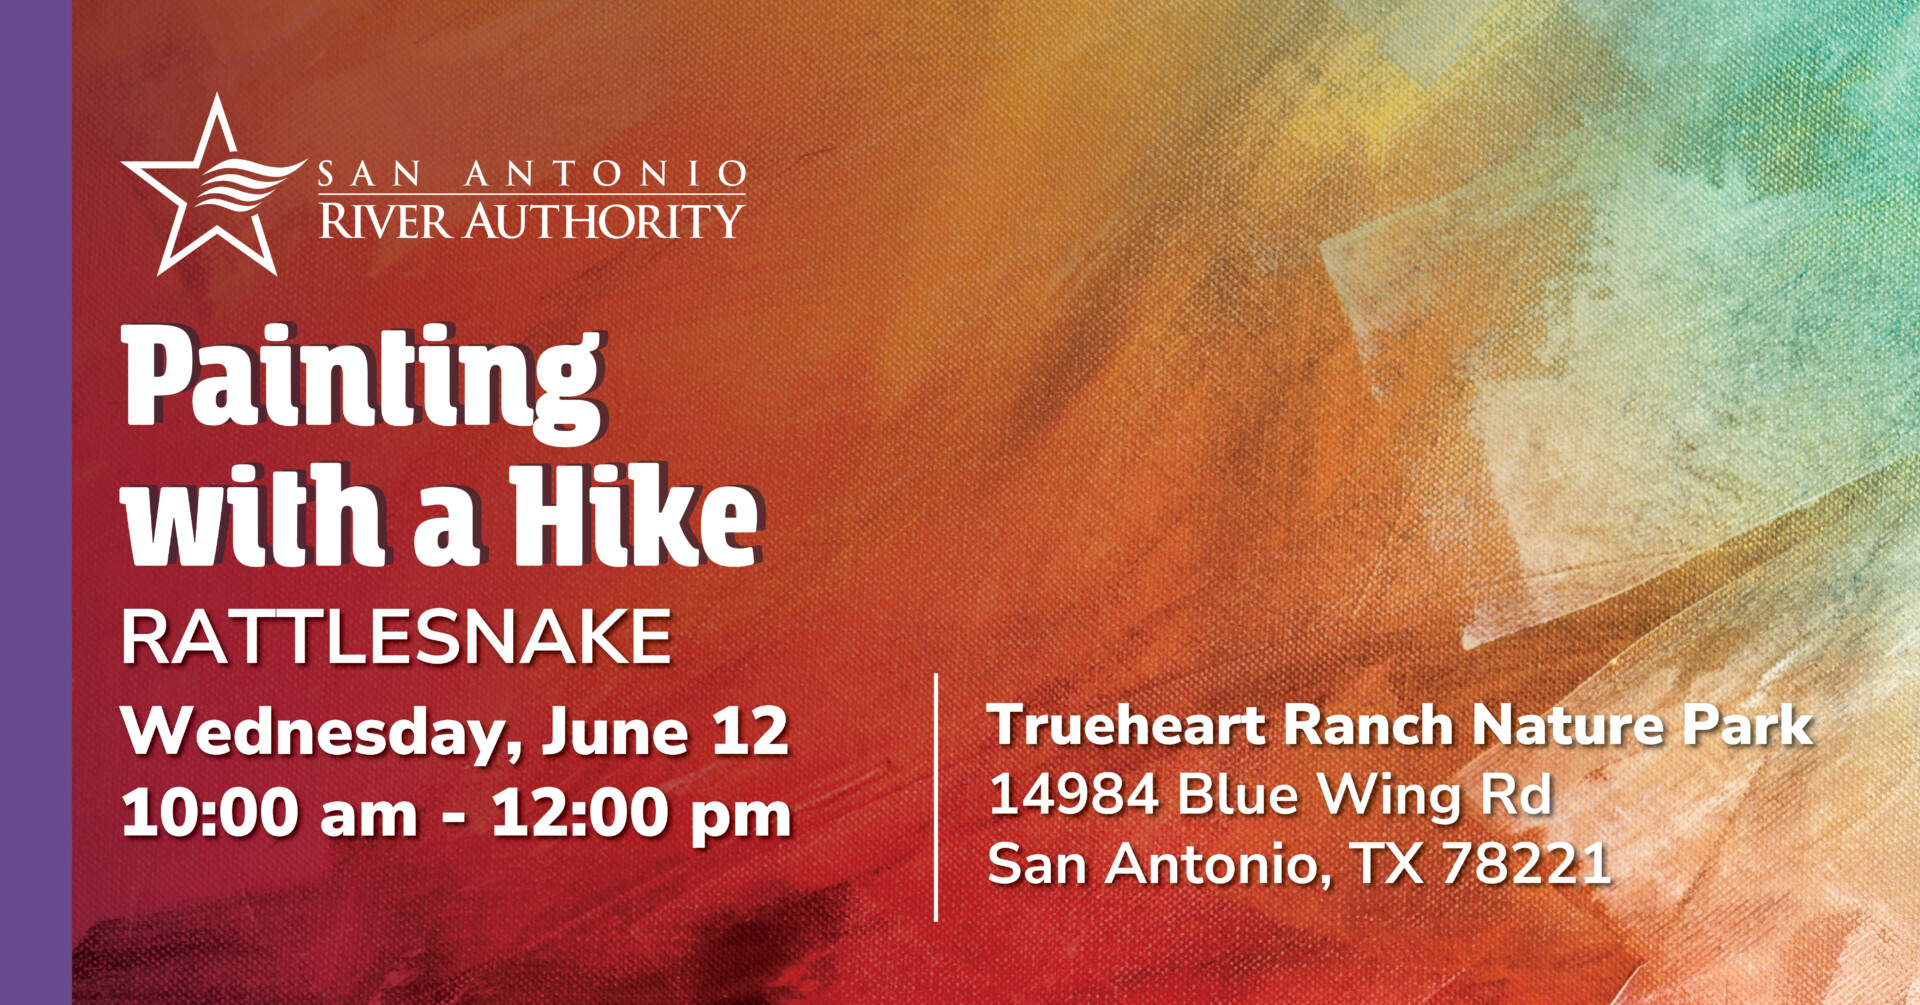 Painting with a Hike - Rattlesnake